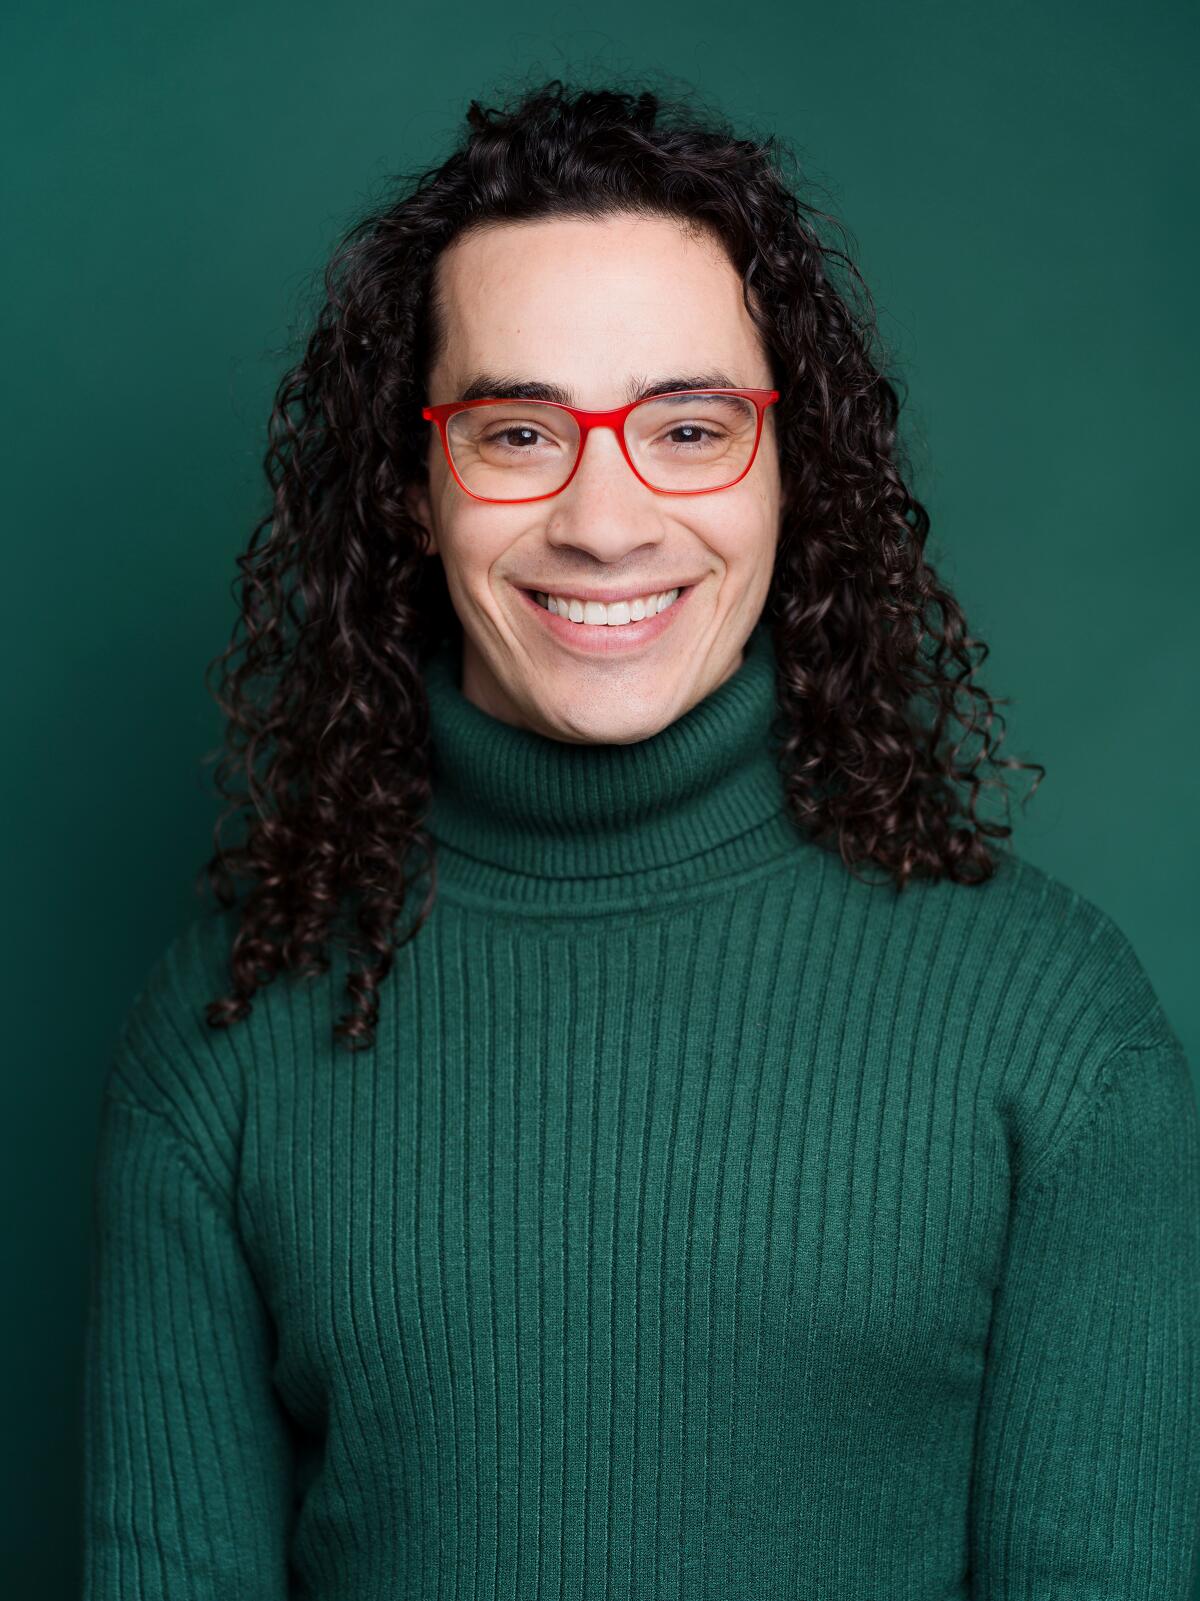 Jake Brasch, in a green turtleneck sweater and red-framed glasses, smiles at the camera. 